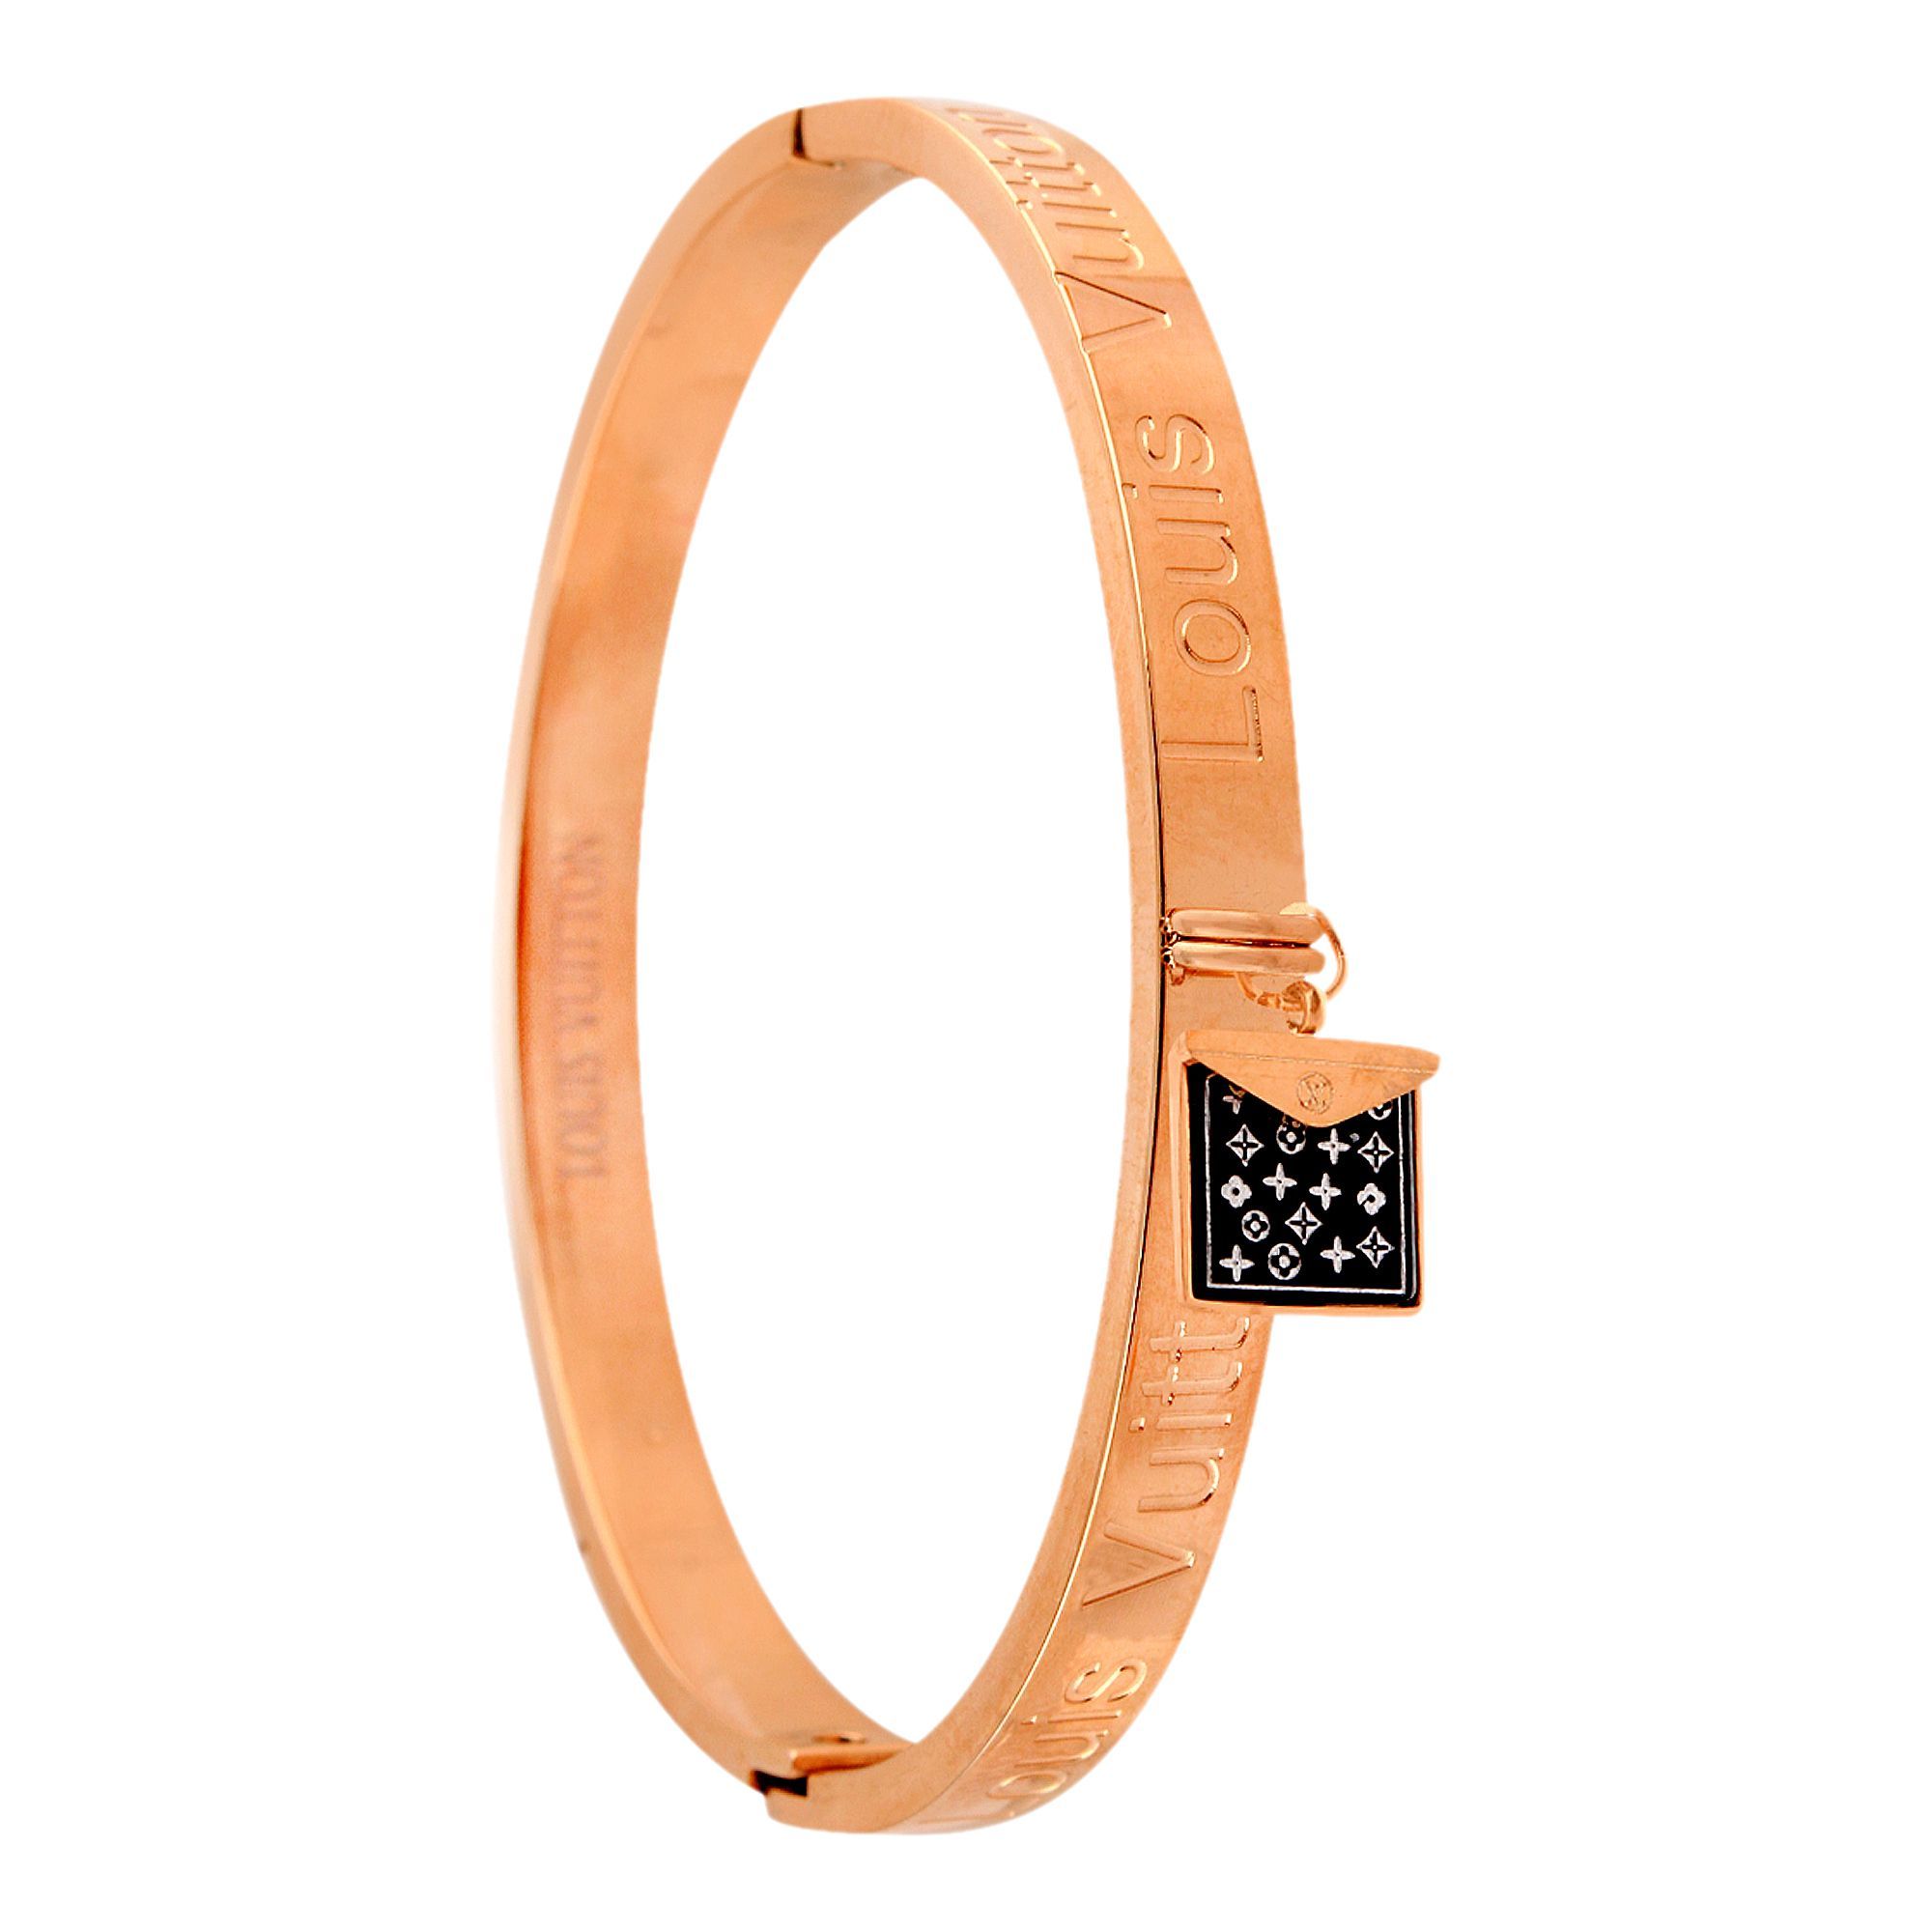 Purchase LV Style Girls Bracelet, Rose Gold, NS-0177 Online at Best Price in Pakistan - 0